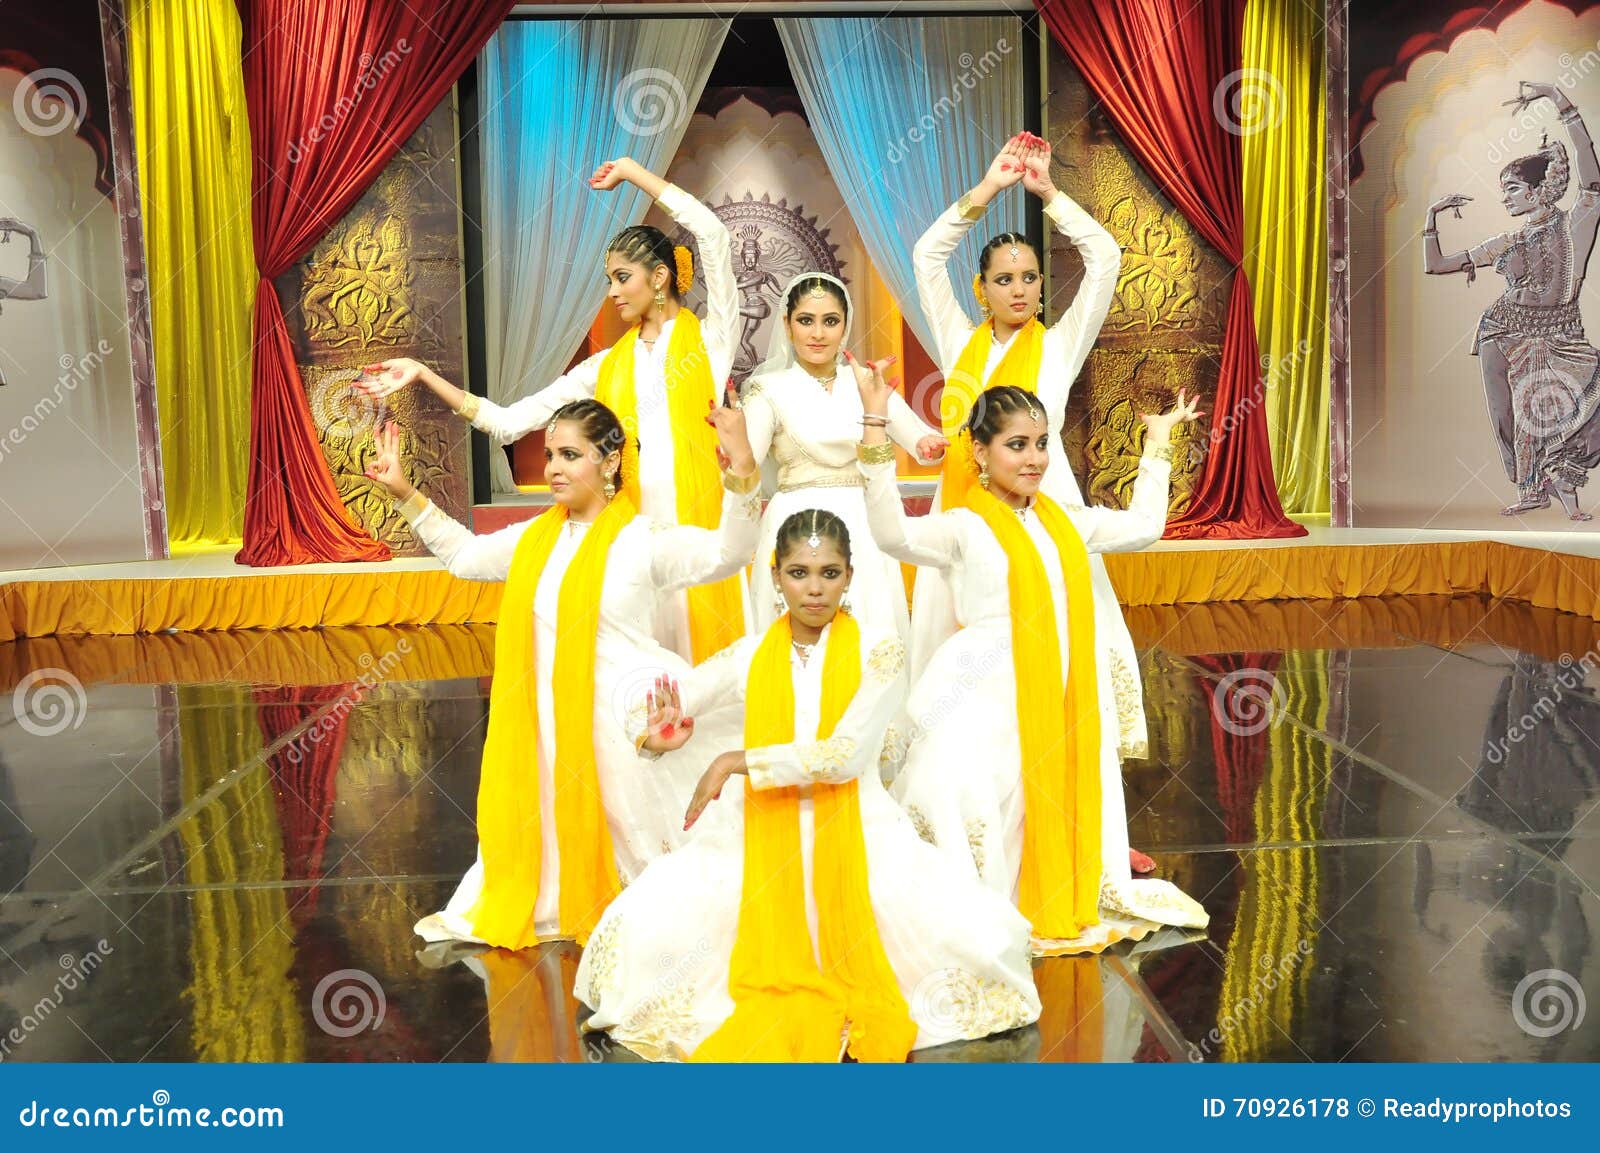 Kathak Dance editorial stock photo. Image of expression - 70926178